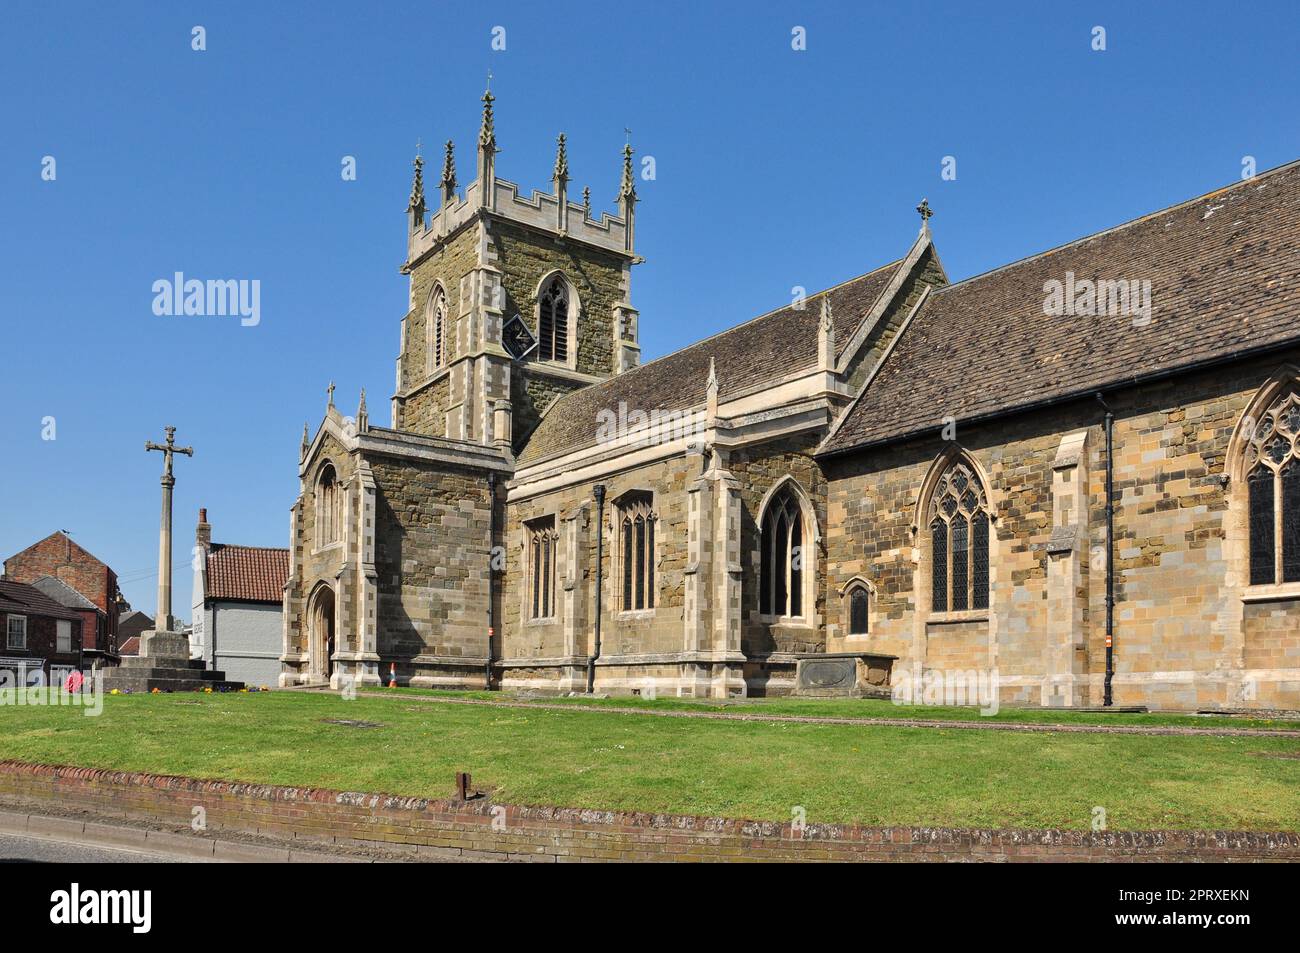 St Wilfred's Church, High Street, Alford, Lincolnshire, England, UK Stock Photo